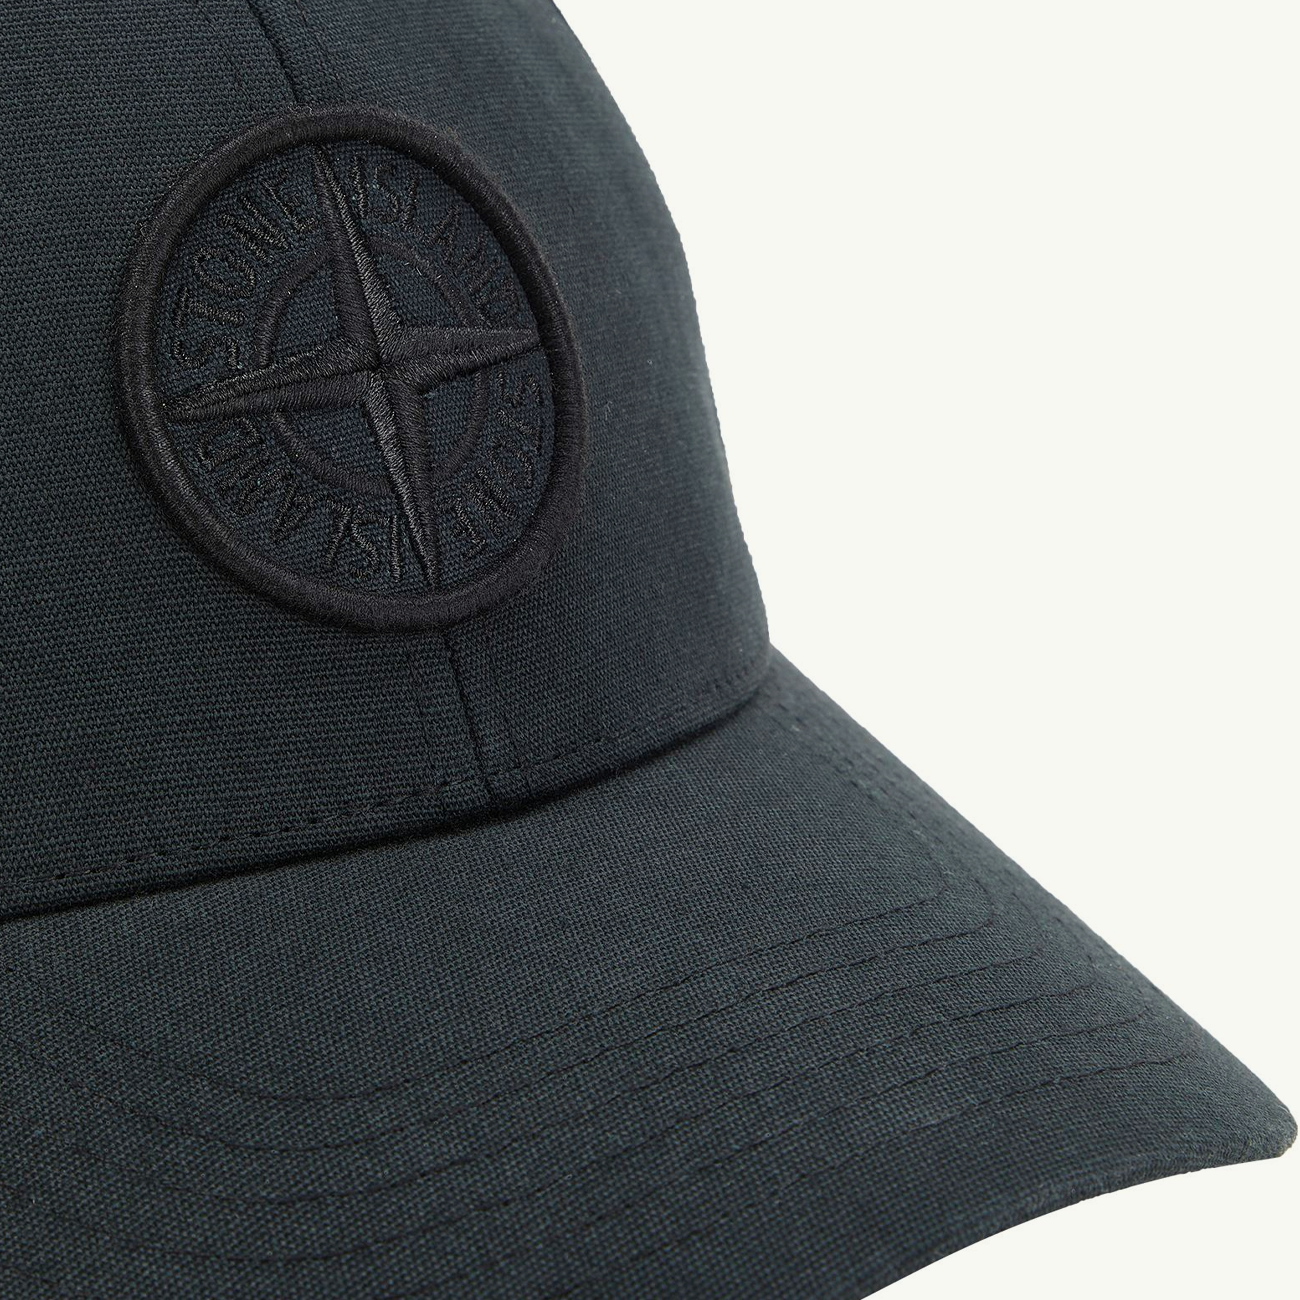 Cap Embroidered Compass Patch - Black 2980